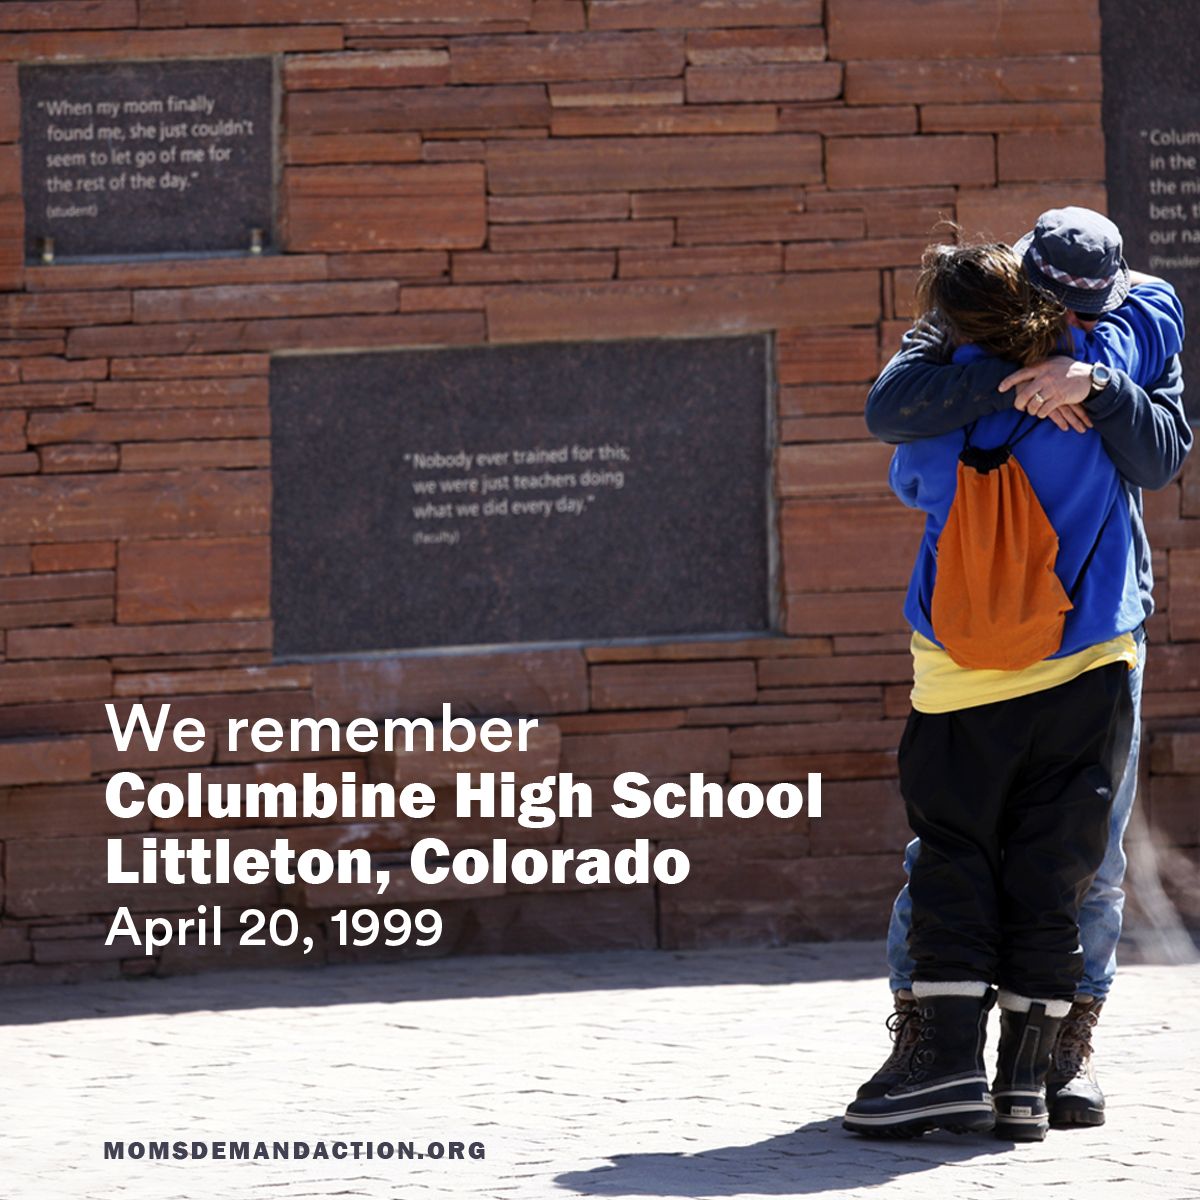 Twenty-five years ago today, two heavily armed students shot and killed 12 students and one teacher and wounded 21 more people at Columbine High School in Littleton, Colorado. It remains the deadliest mass shooting and school shooting in Colorado’s history.